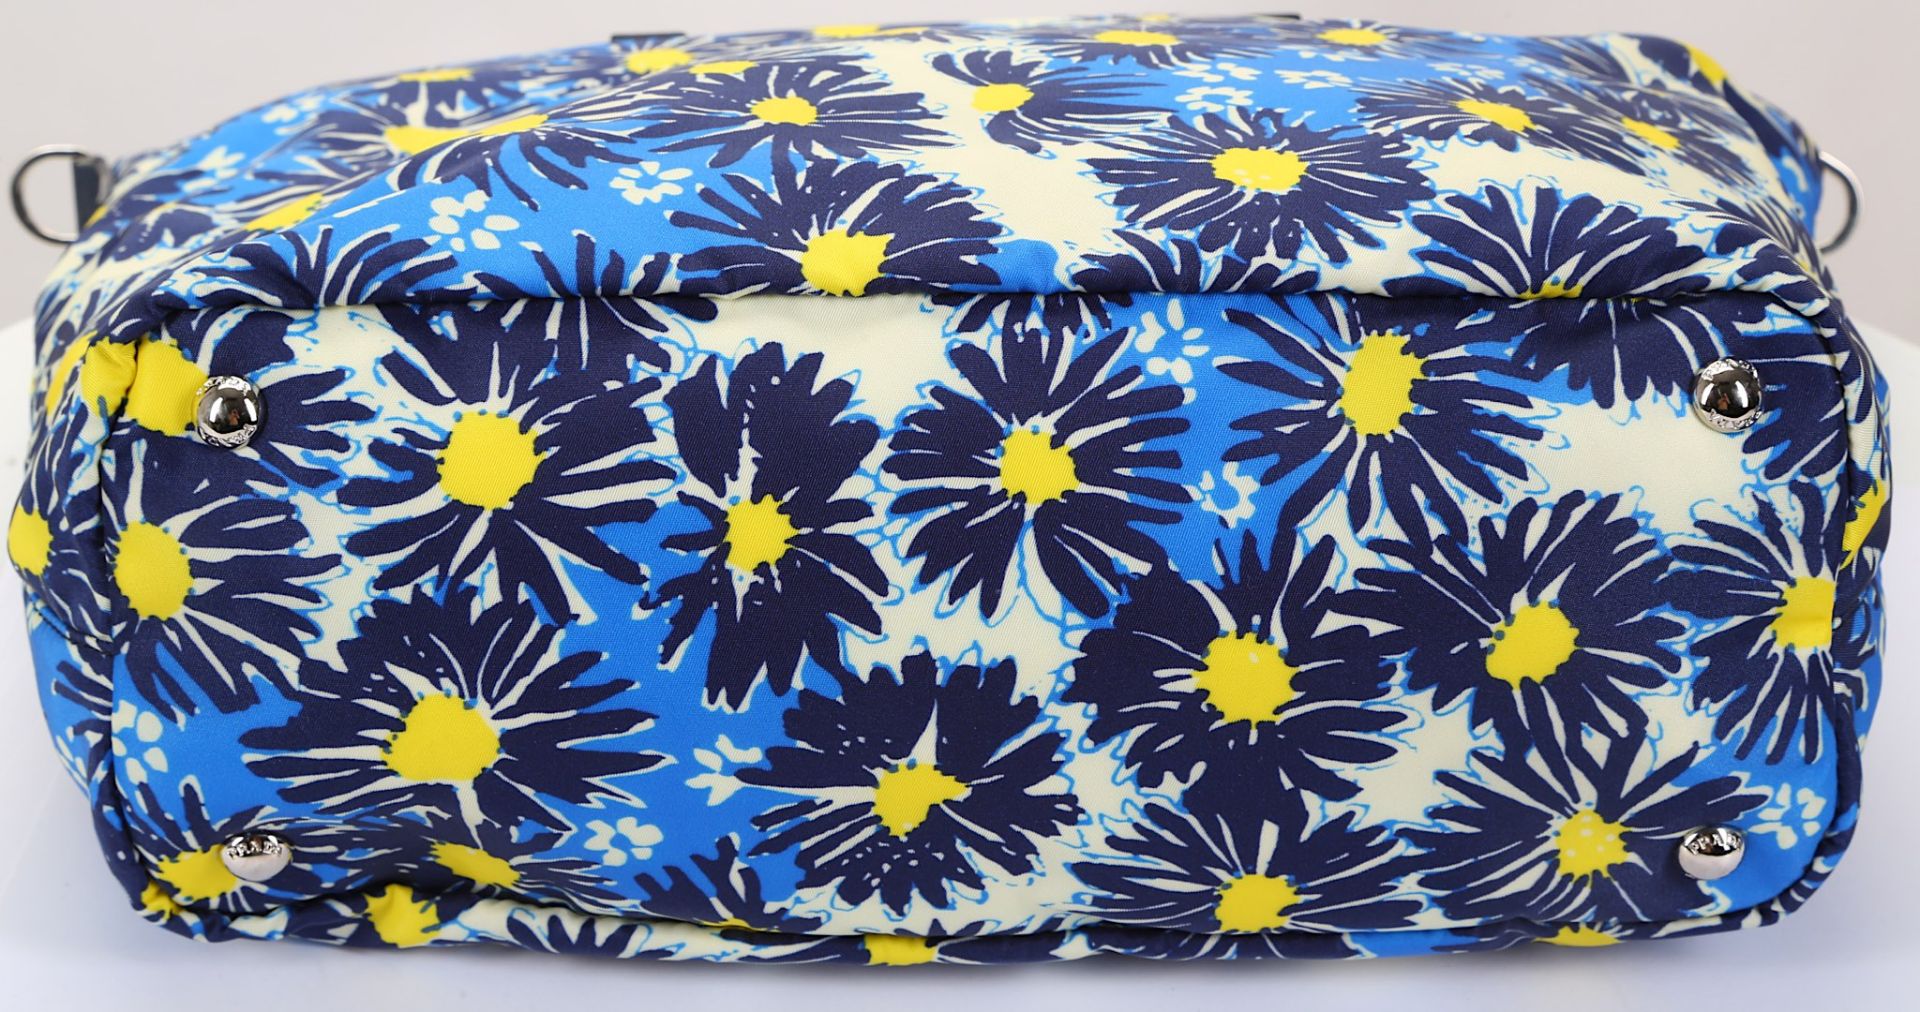 Prada Blue Floral Nylon Shopper, c. 2016, nylon printed with blue and yellow flower heads, blue - Image 4 of 5